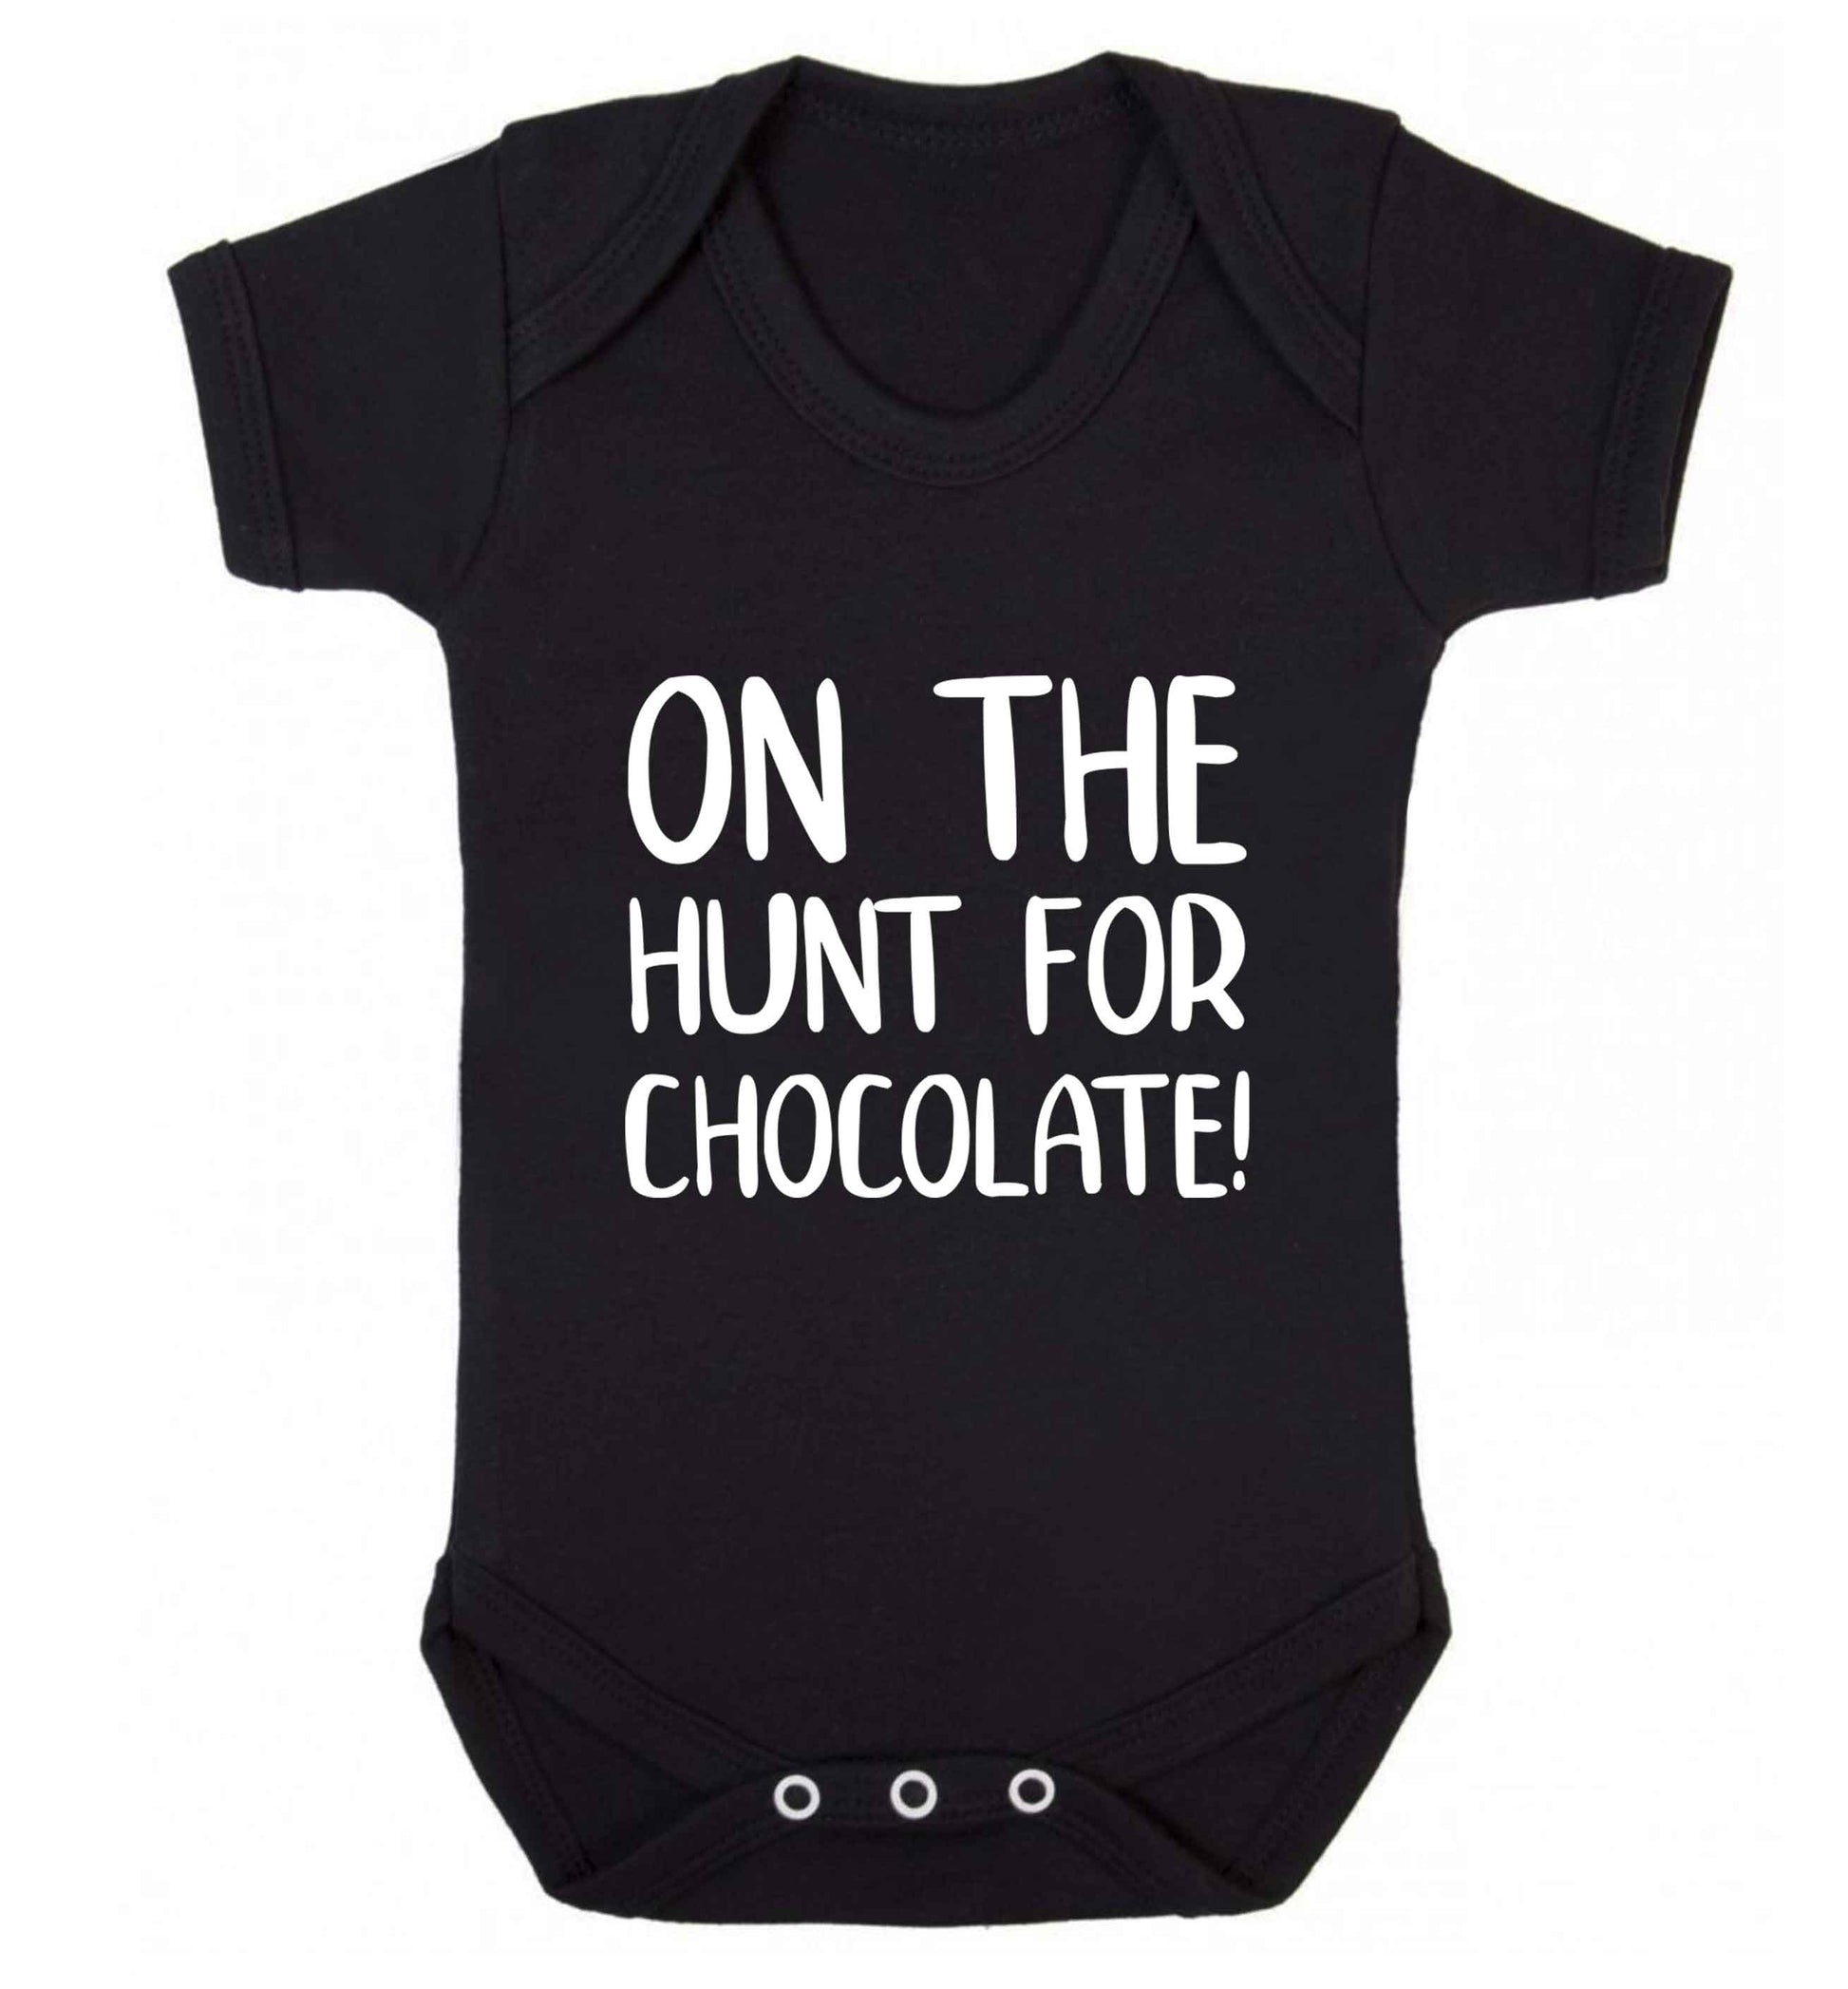 On the hunt for chocolate! baby vest black 18-24 months